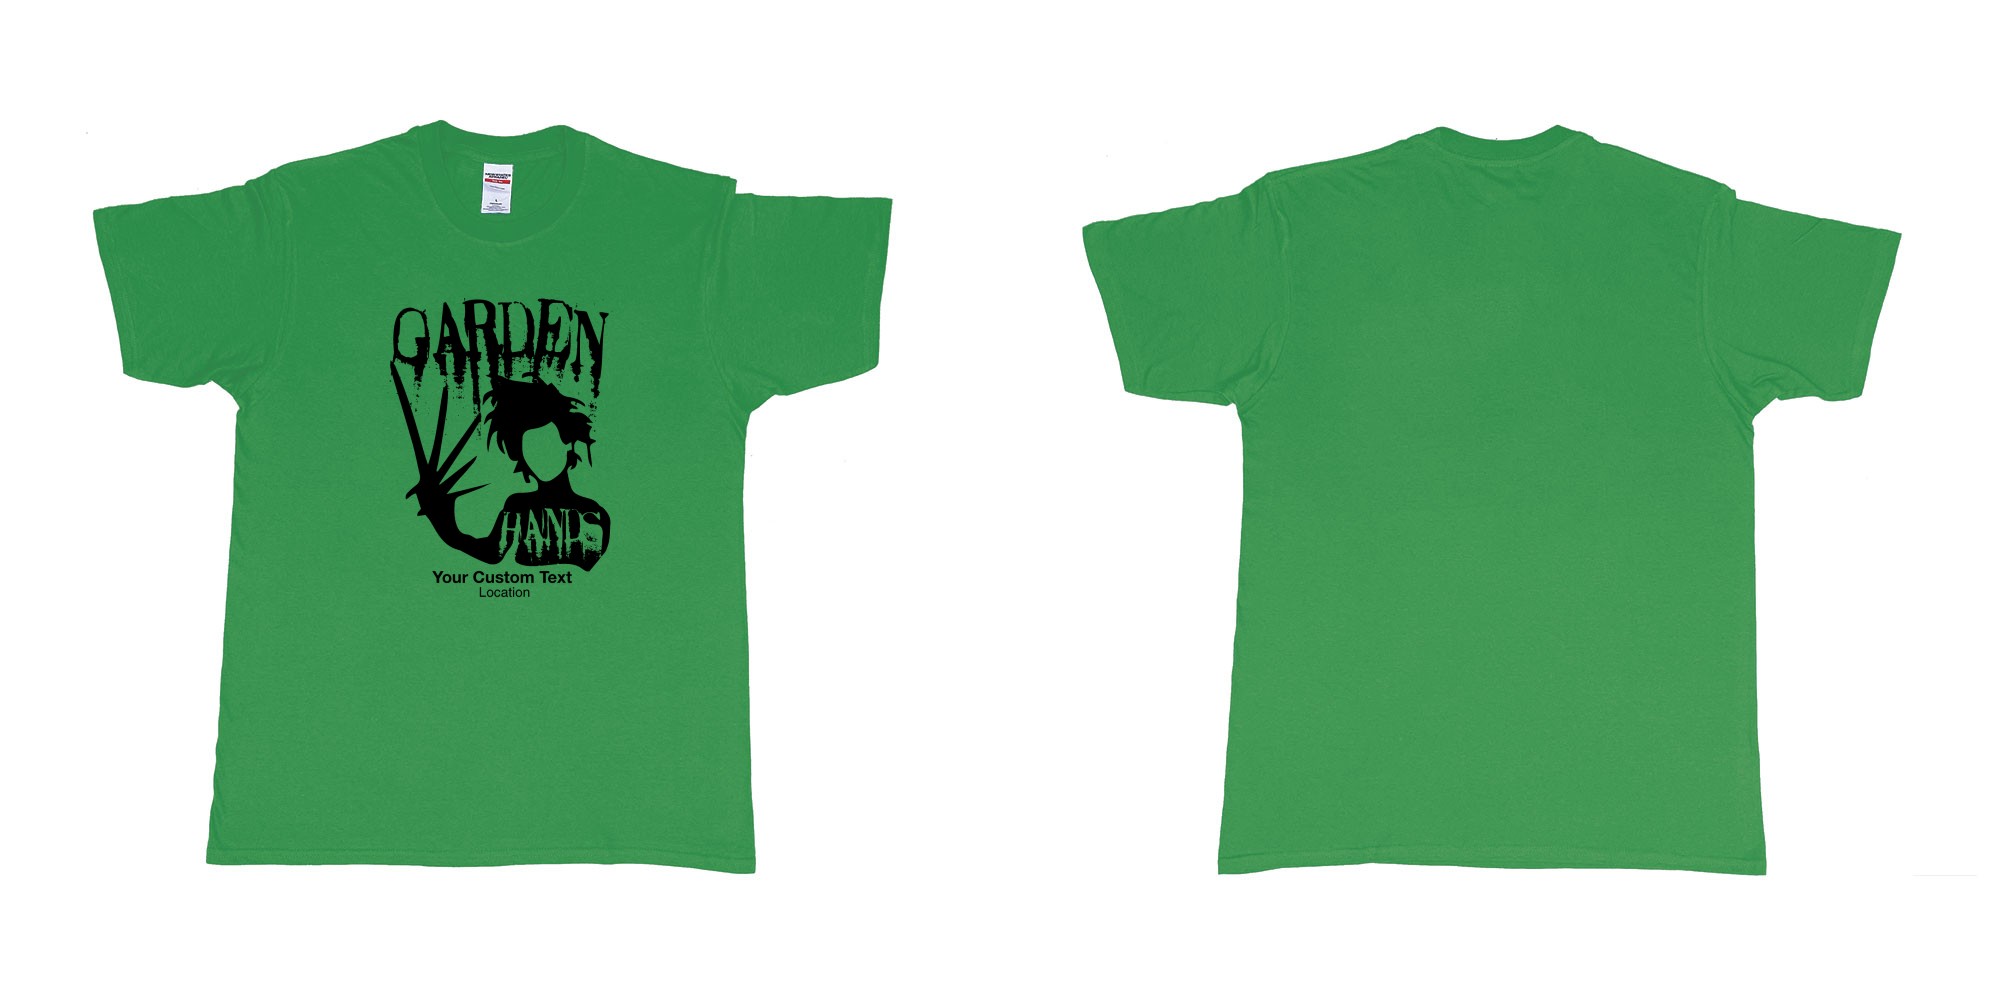 Custom tshirt design garden hands edward scissorhands custom design in fabric color irish-green choice your own text made in Bali by The Pirate Way